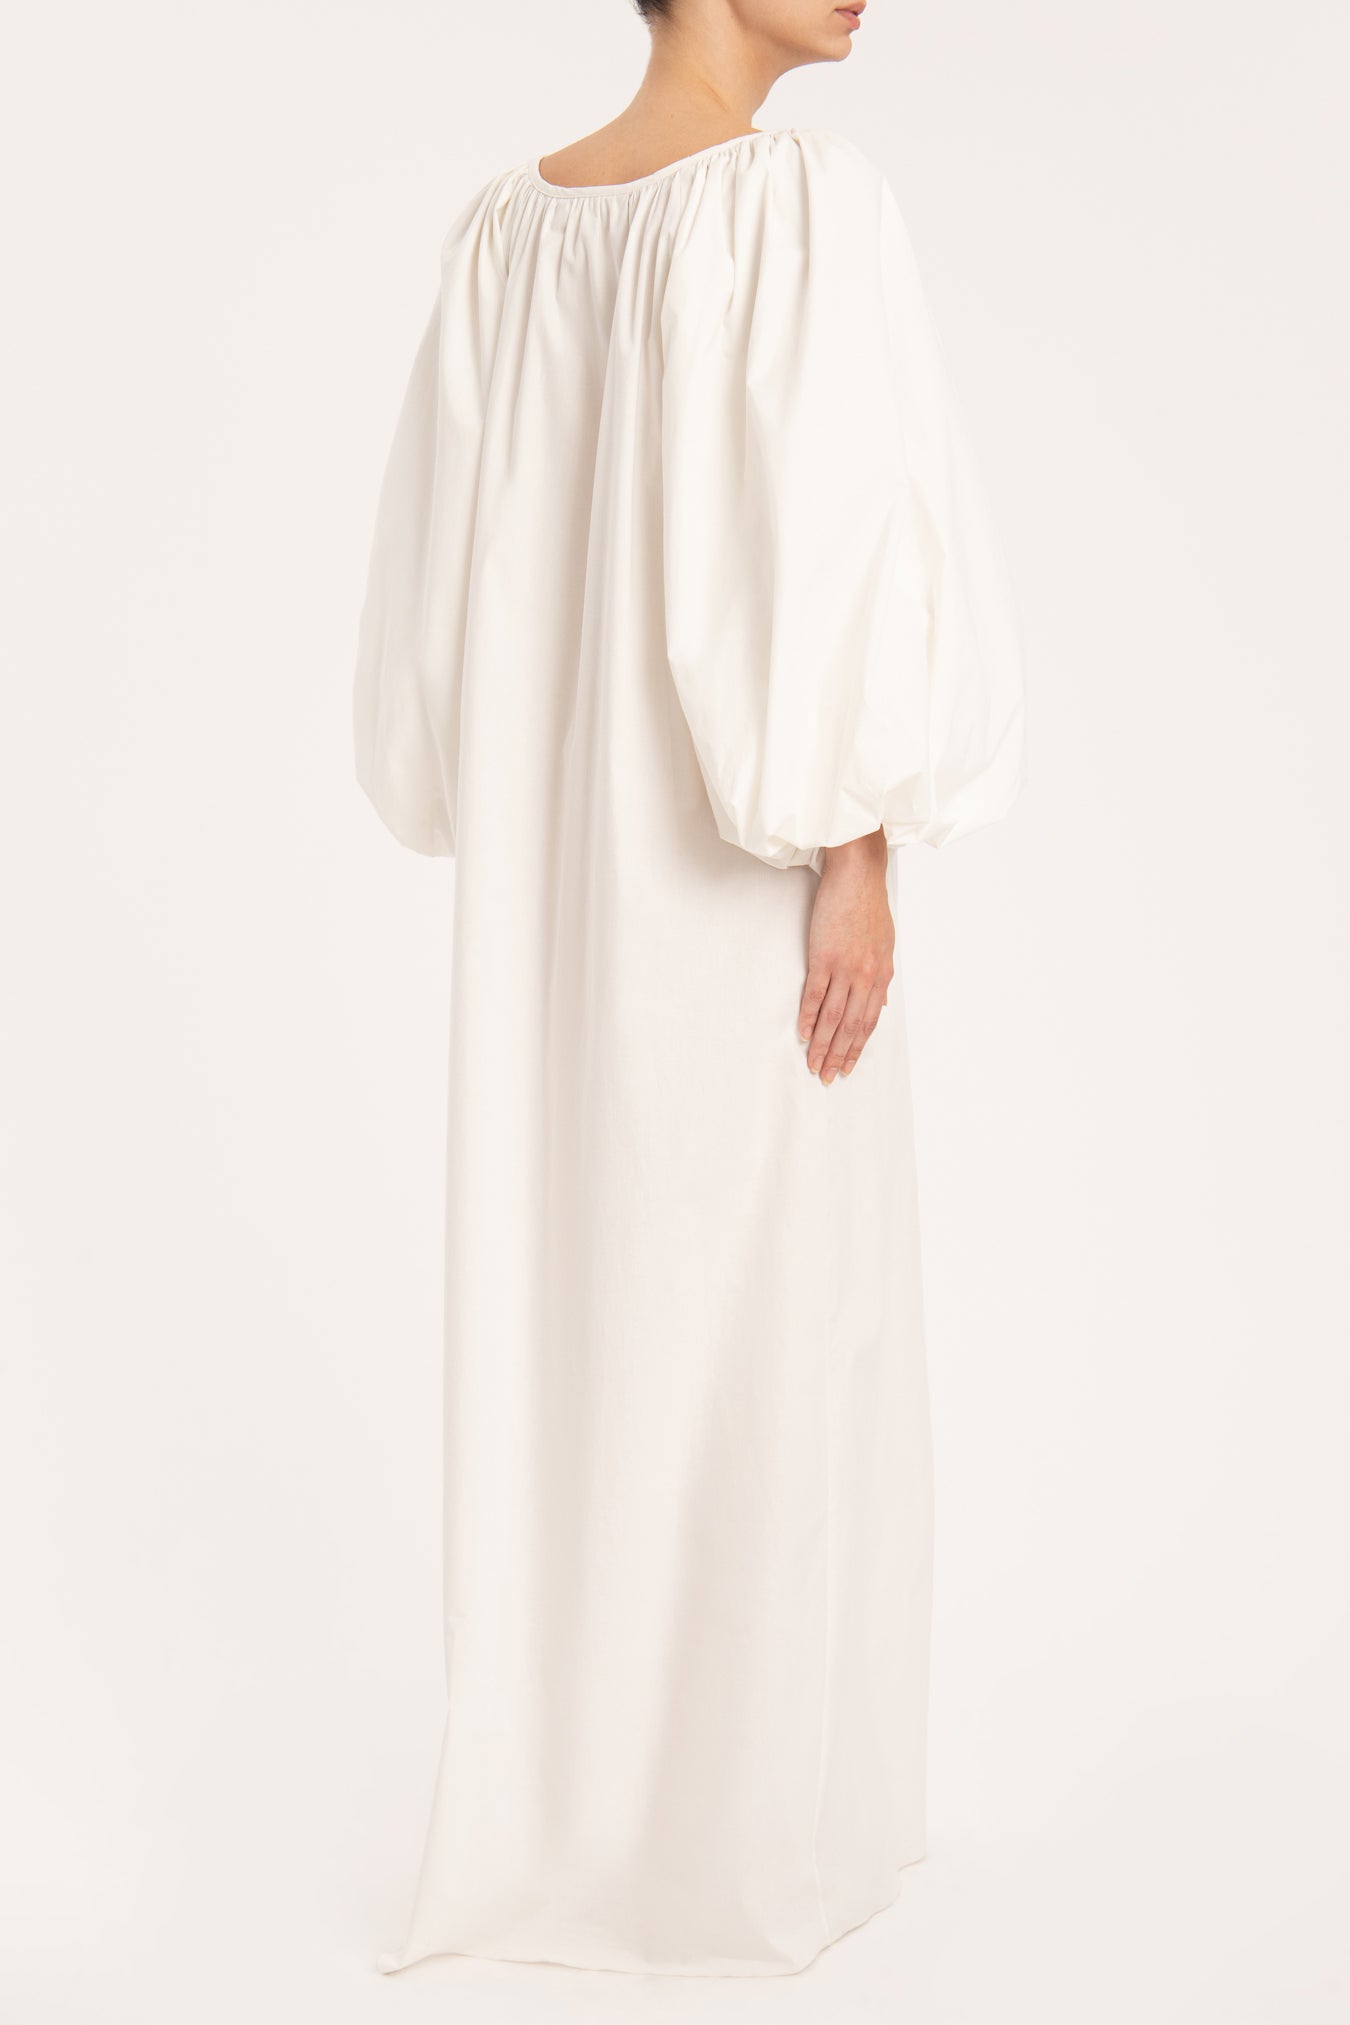 Effortless Chic Off White Puff-Sleeved Long Dress Back